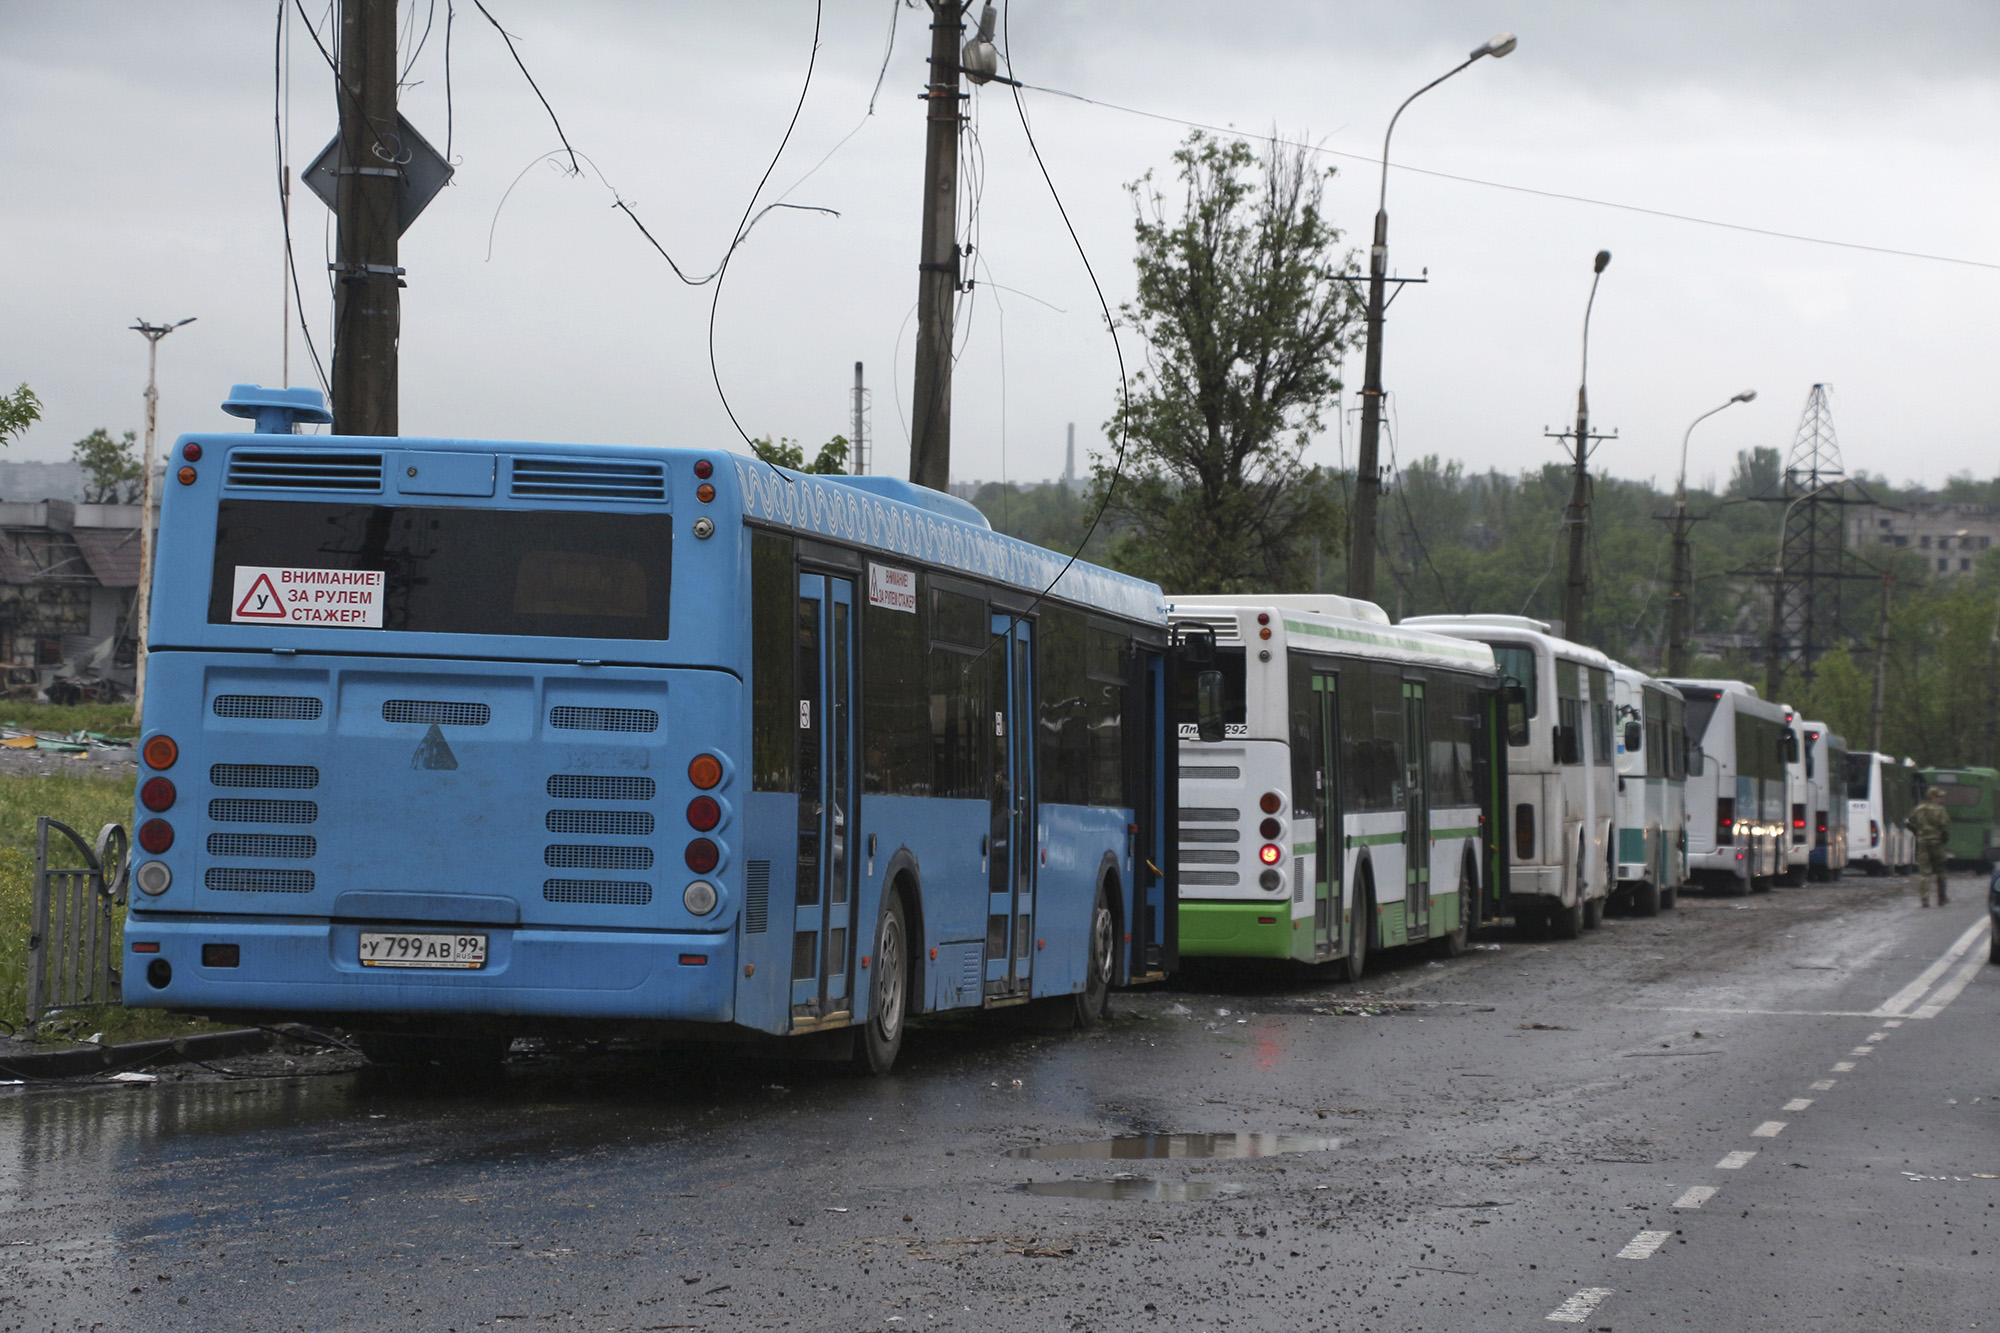 Buses wait for Ukrainian servicemen to transport them from Mariupol, Ukraine, to a prison in Olenivka after they left the besieged Azovstal steel plant, on May 18.